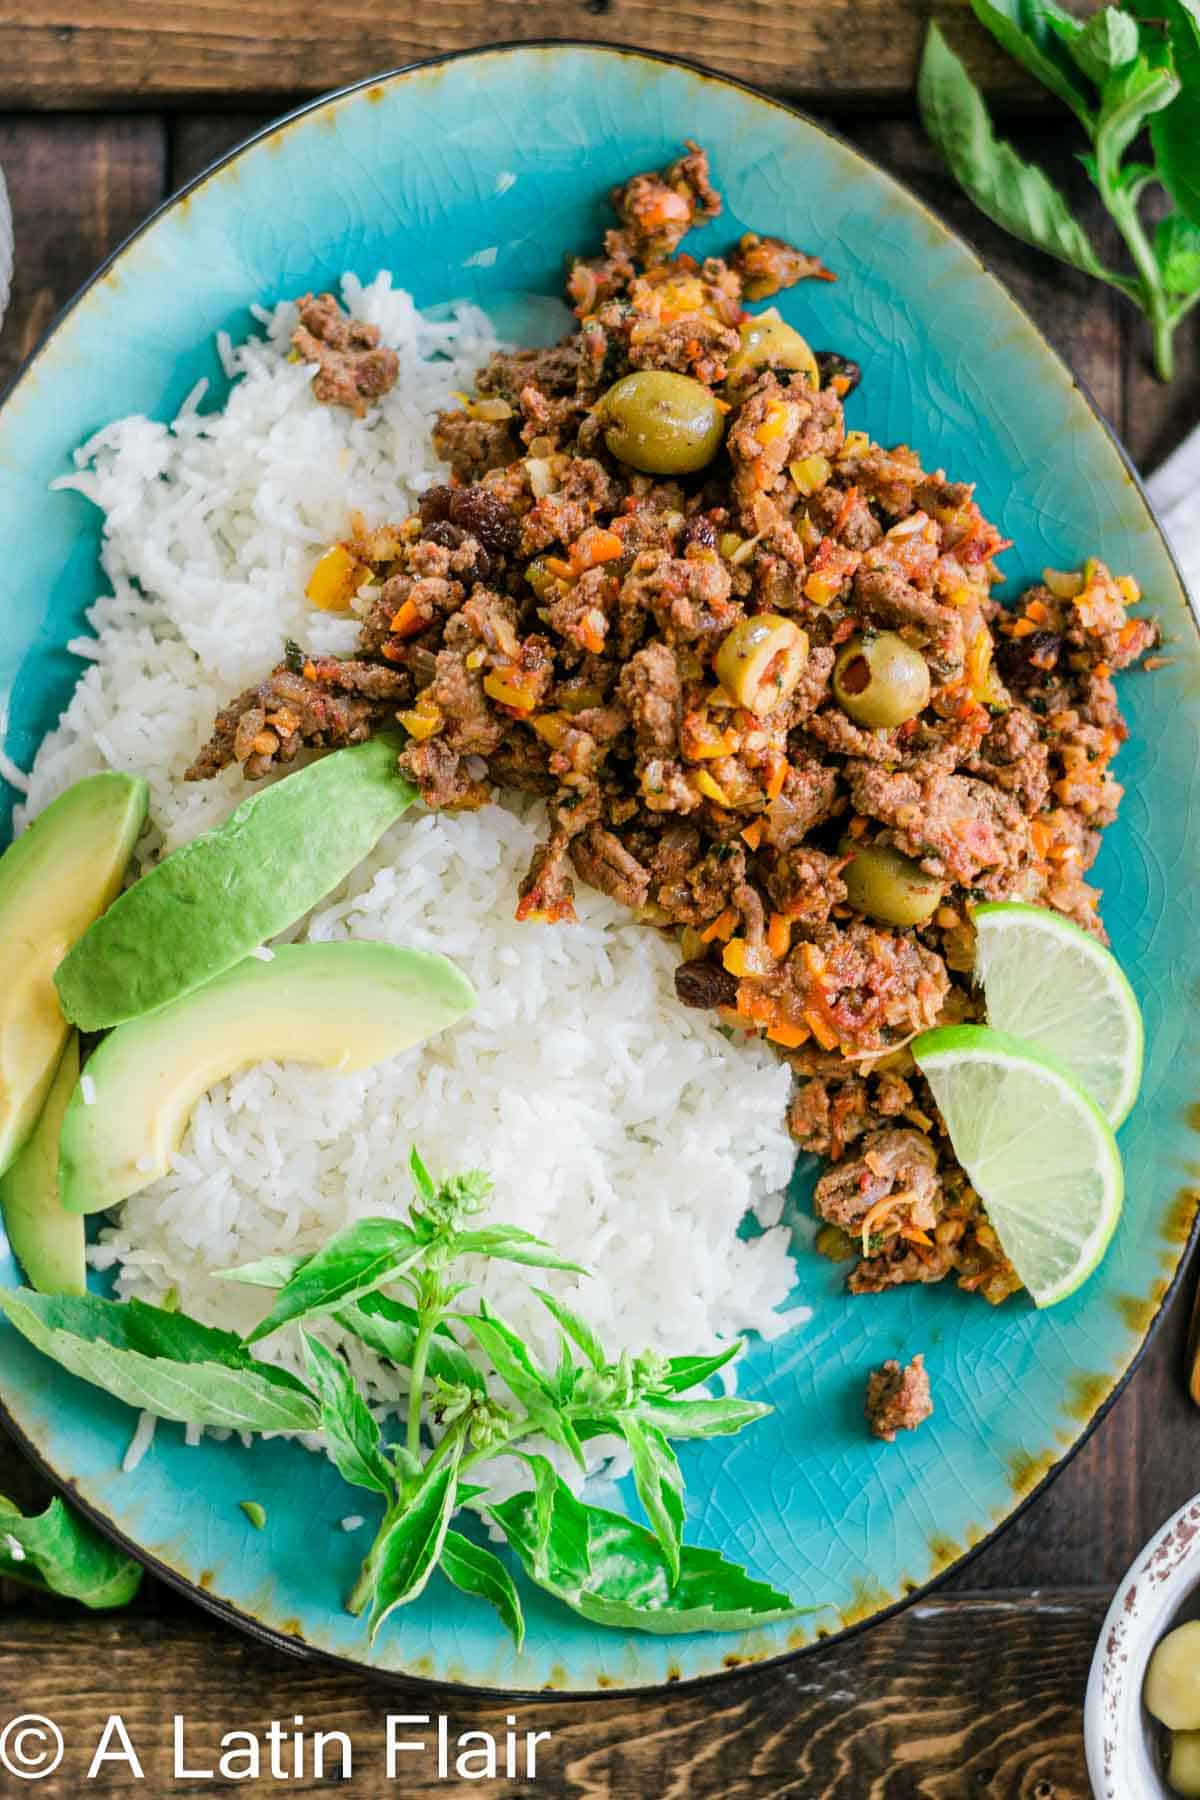 Puerto-rican-picadillo-recipe-served-on-blue-plate